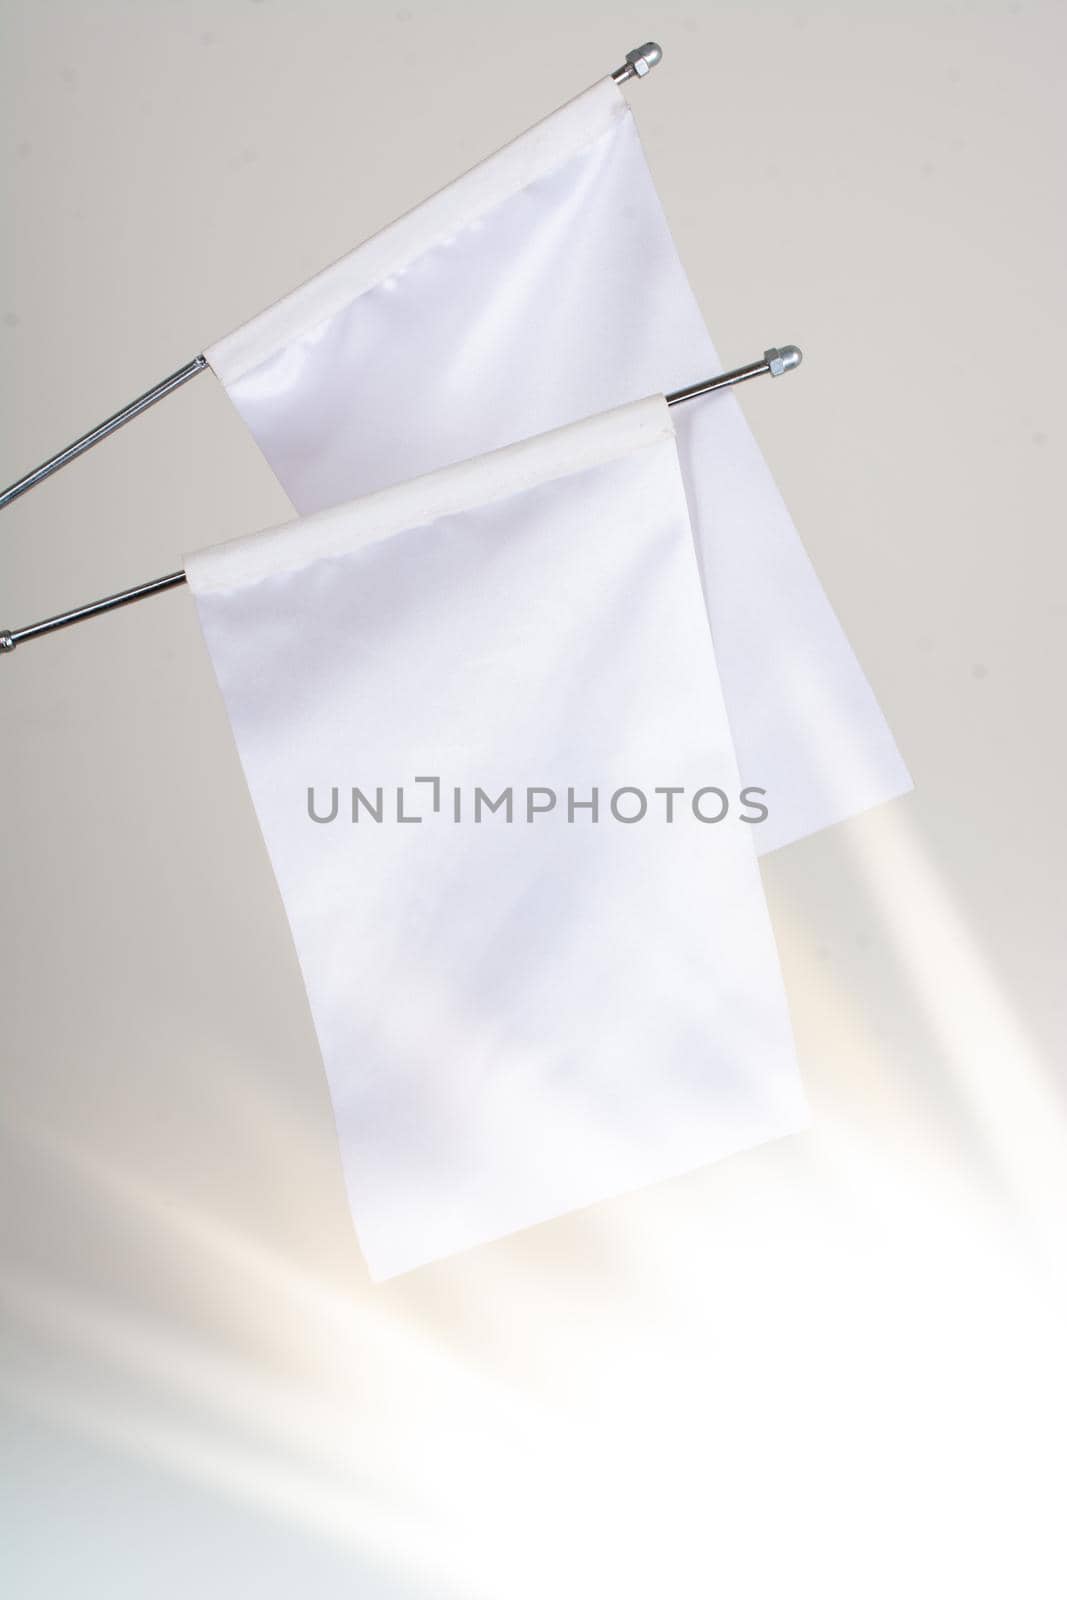 Two white flags on a white background in display by berkay